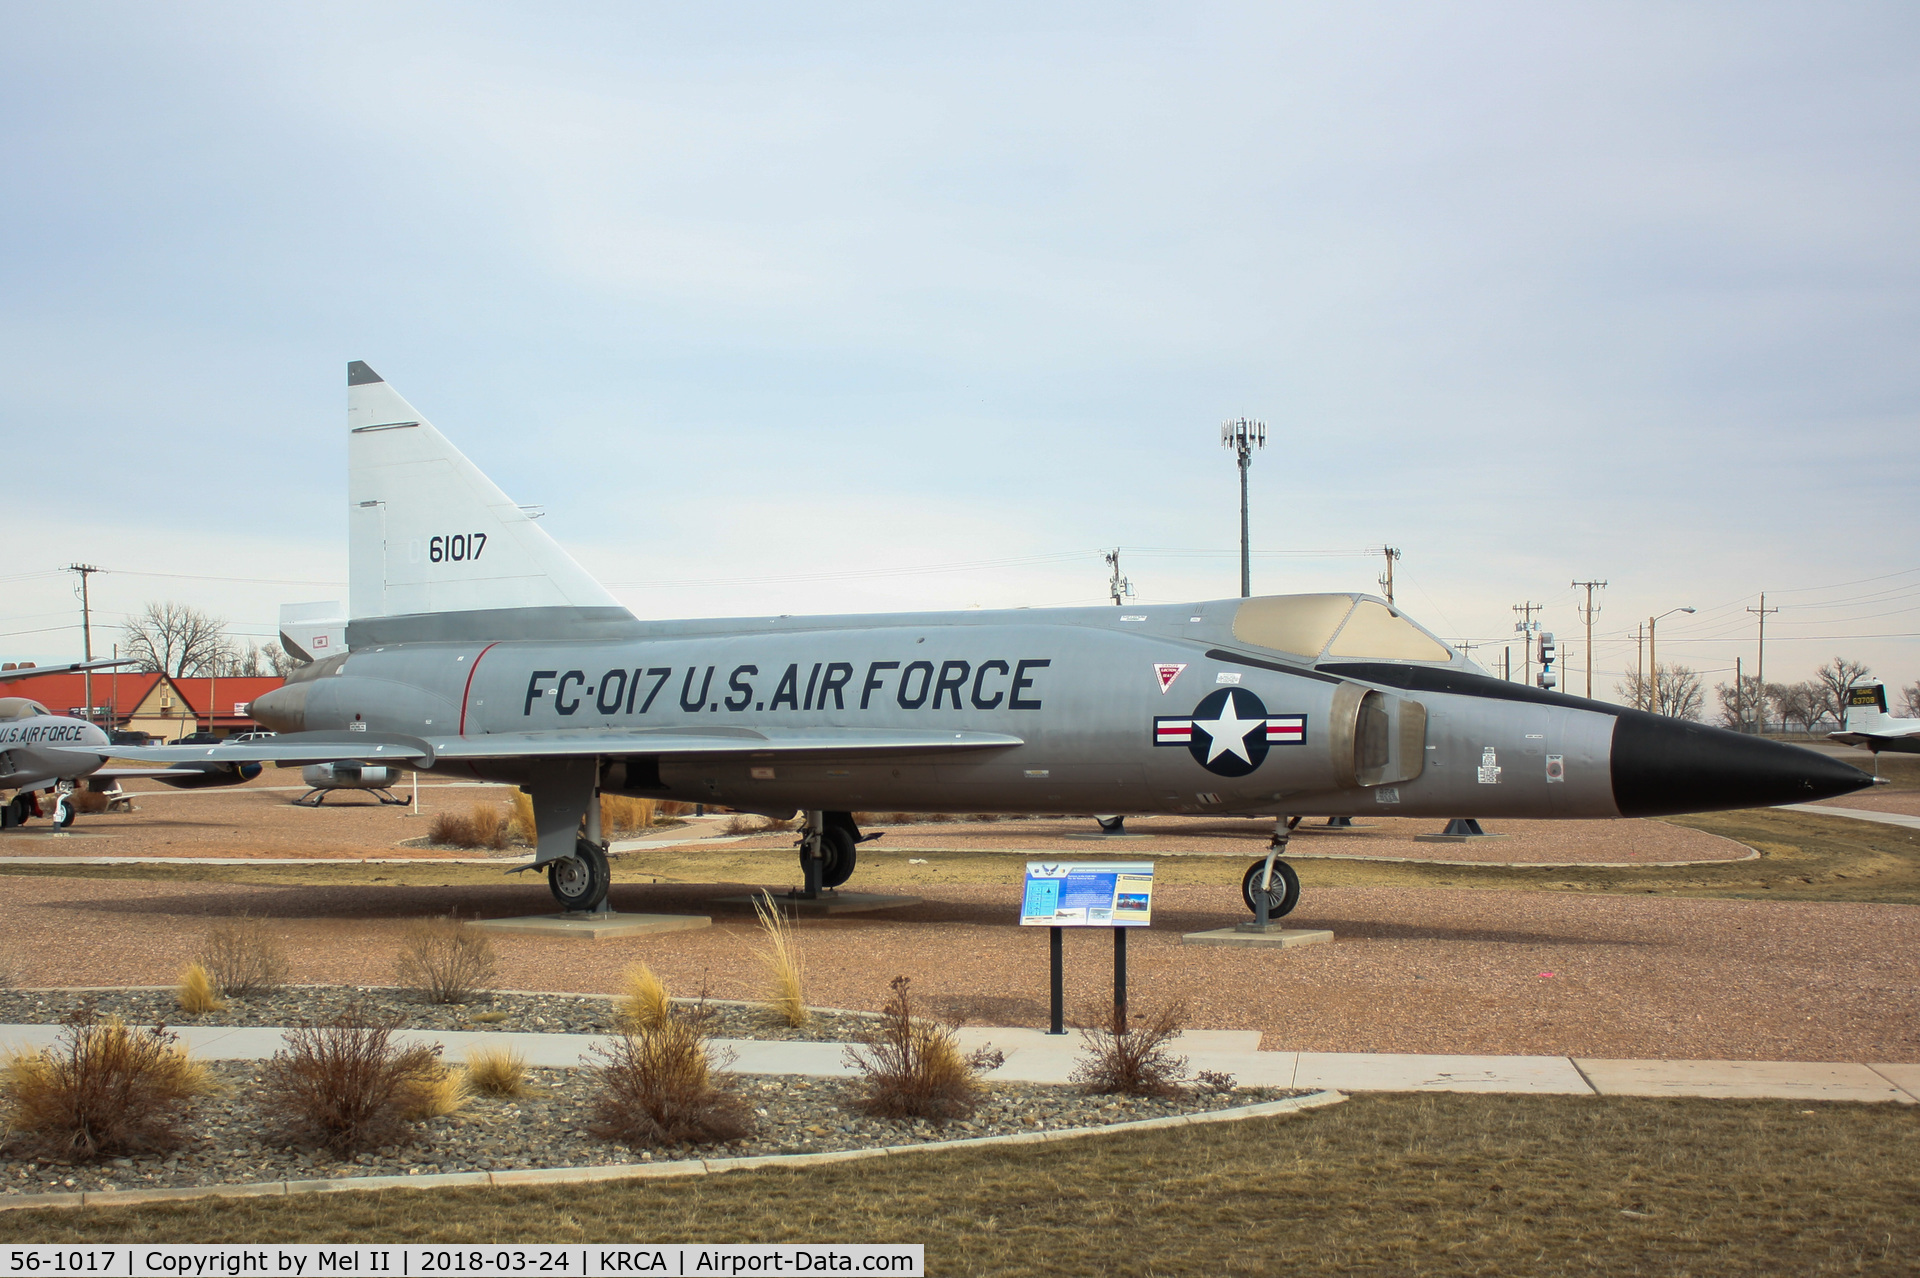 56-1017, 1956 Convair F-102A Delta Dagger C/N Not found, On display at the South Dakota Air and Space Museum at Ellsworth Air Force Base.